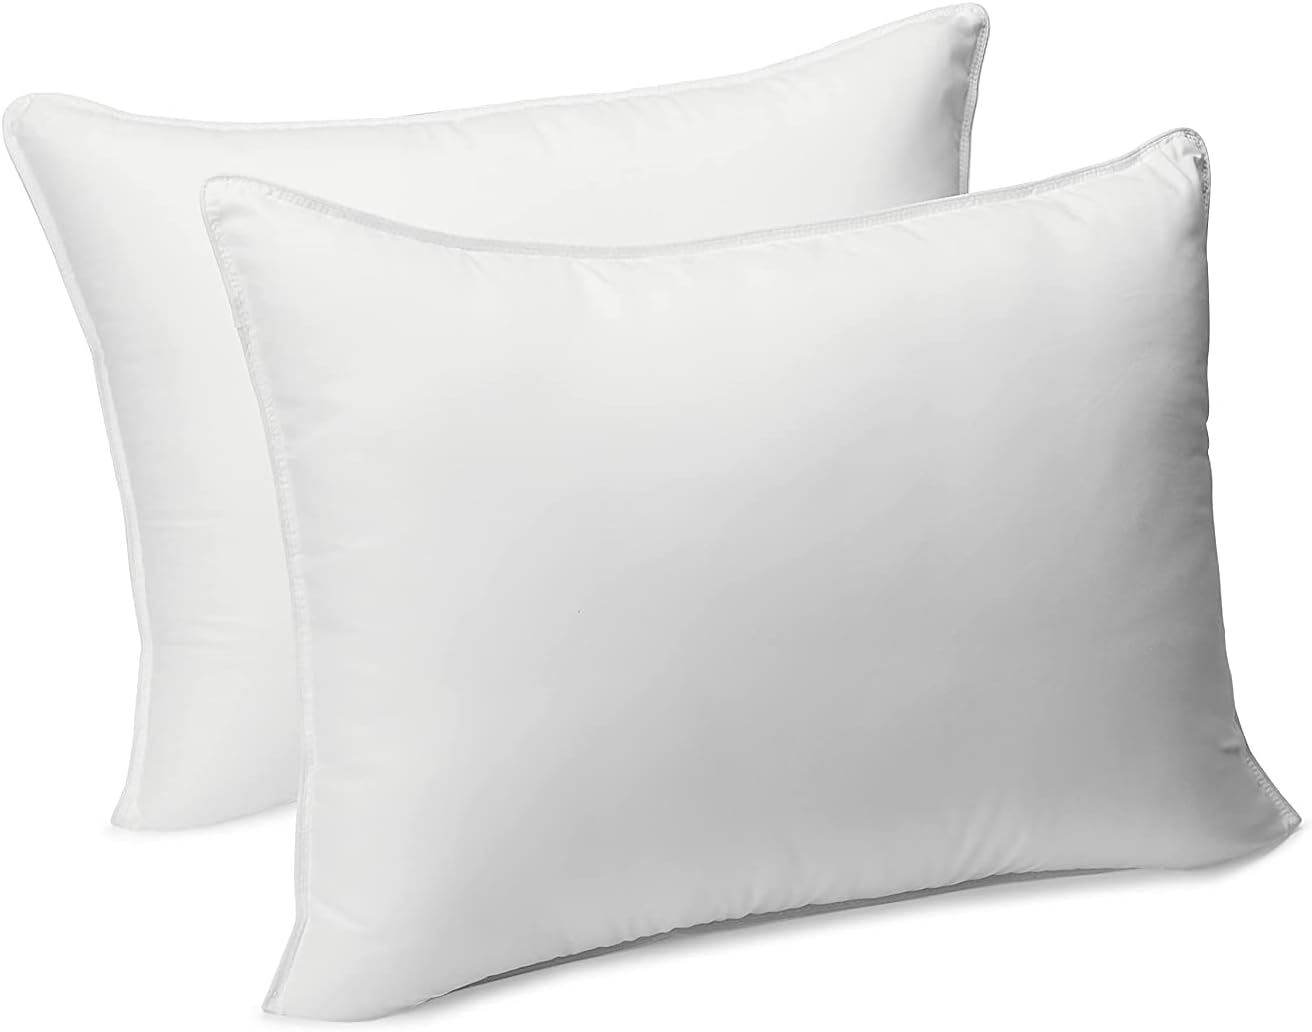 Amazon Basics Down Alternative Bed Pillow and Pillow Protector Case 2-Piece Set, Medium Density, King - Pack of 2, White